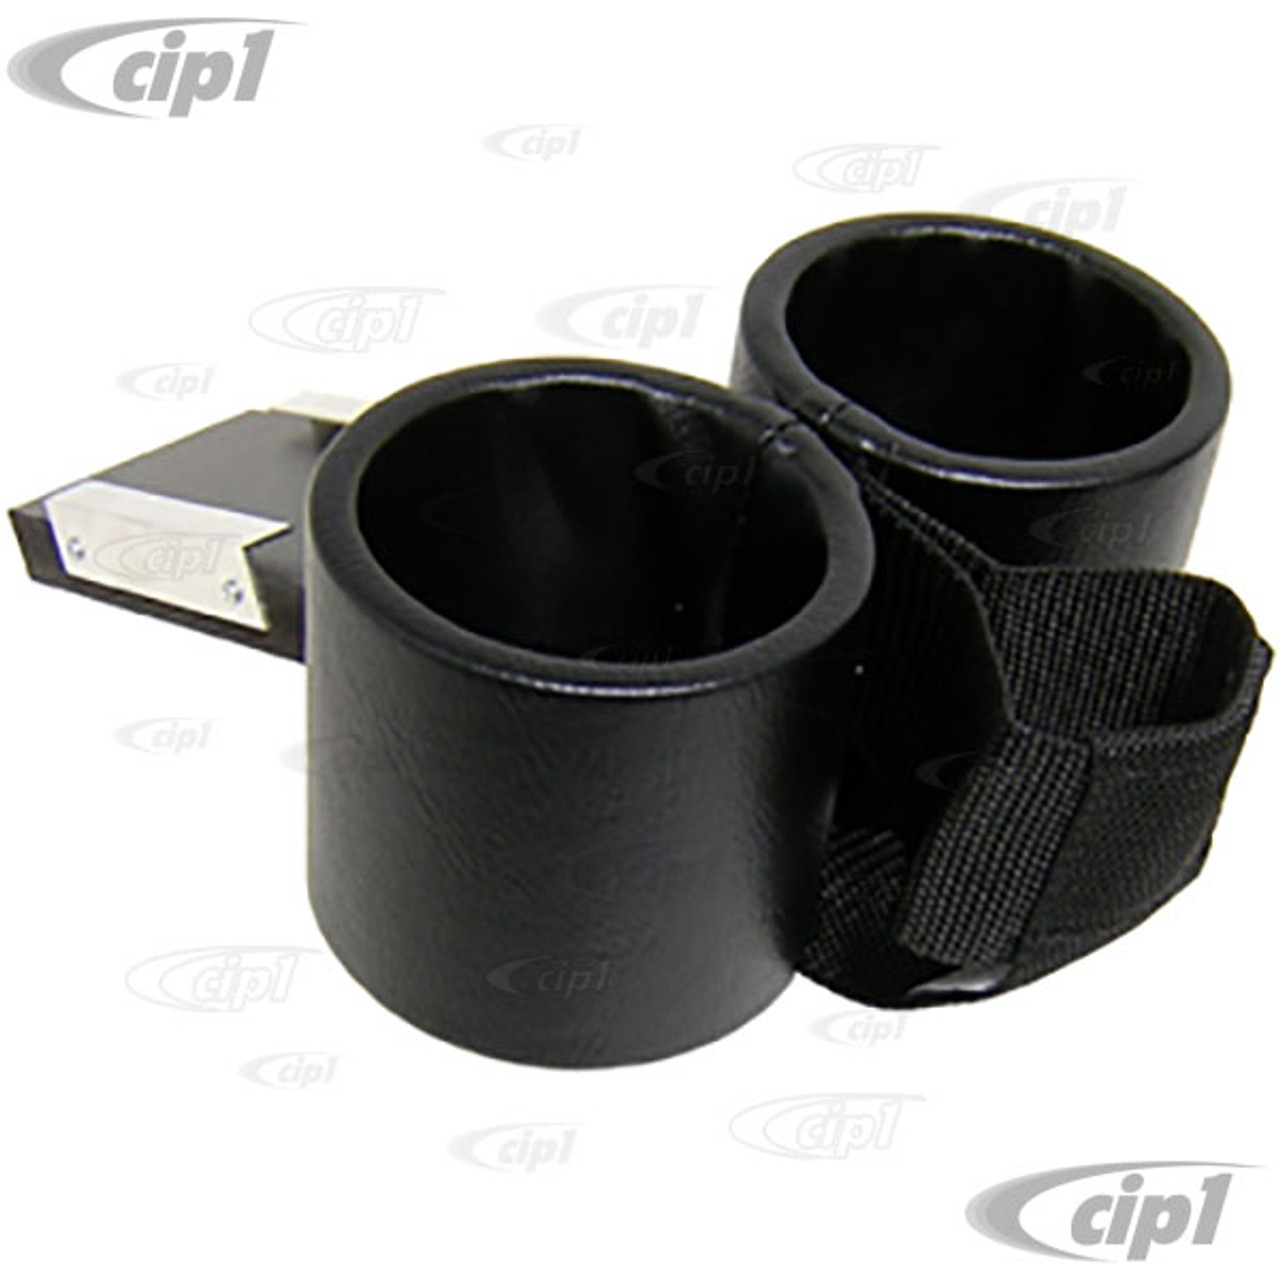 ACC-C10-9109-C - ASHTRAY CUP HOLDER WITH CELL PHONE HOLDER - FITS INTO  ASHTRAY SLOT - SMOOTH BLACK VINYL - THING 69-79 - SOLD EACH